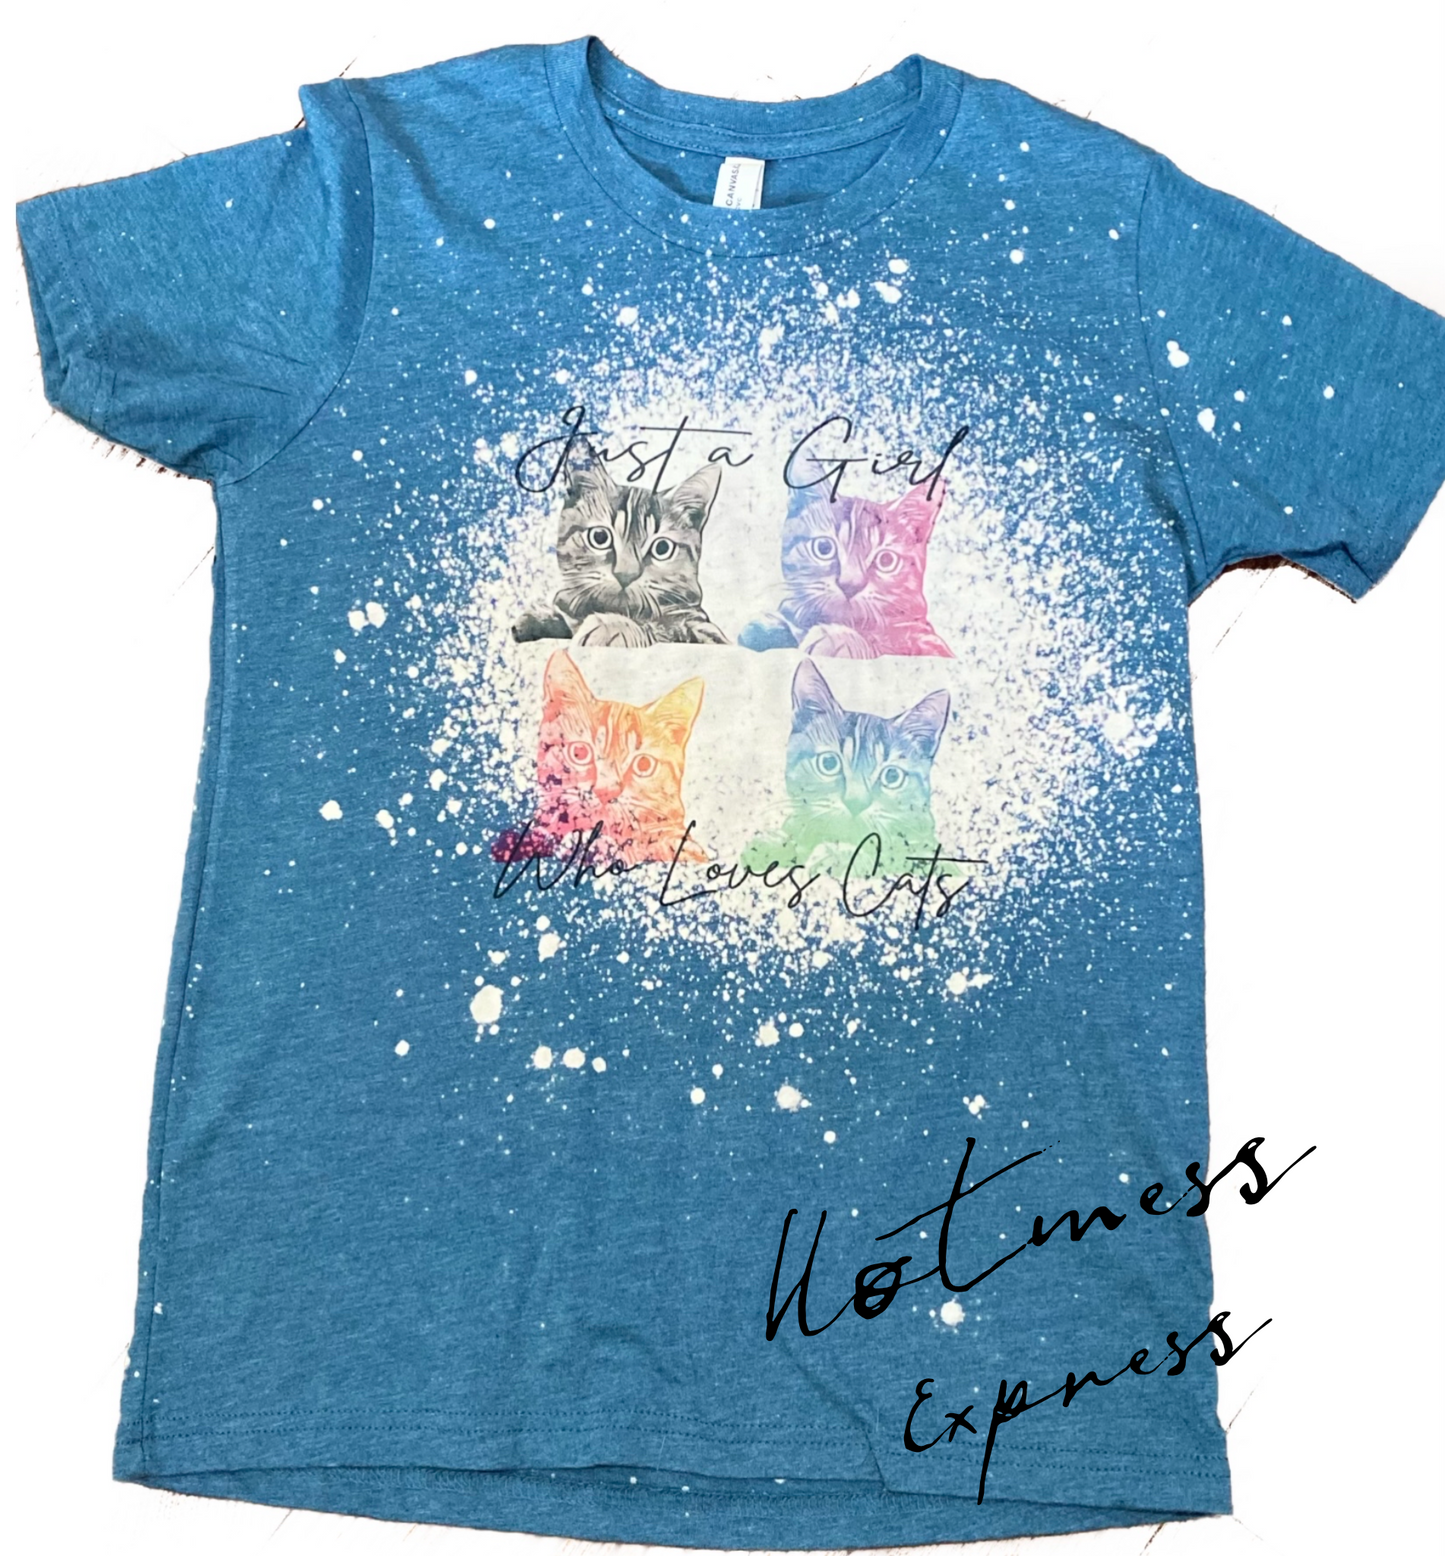 Just a Girl Who Loves Cats  Tee Kids or Adult Bleached Tie Dye